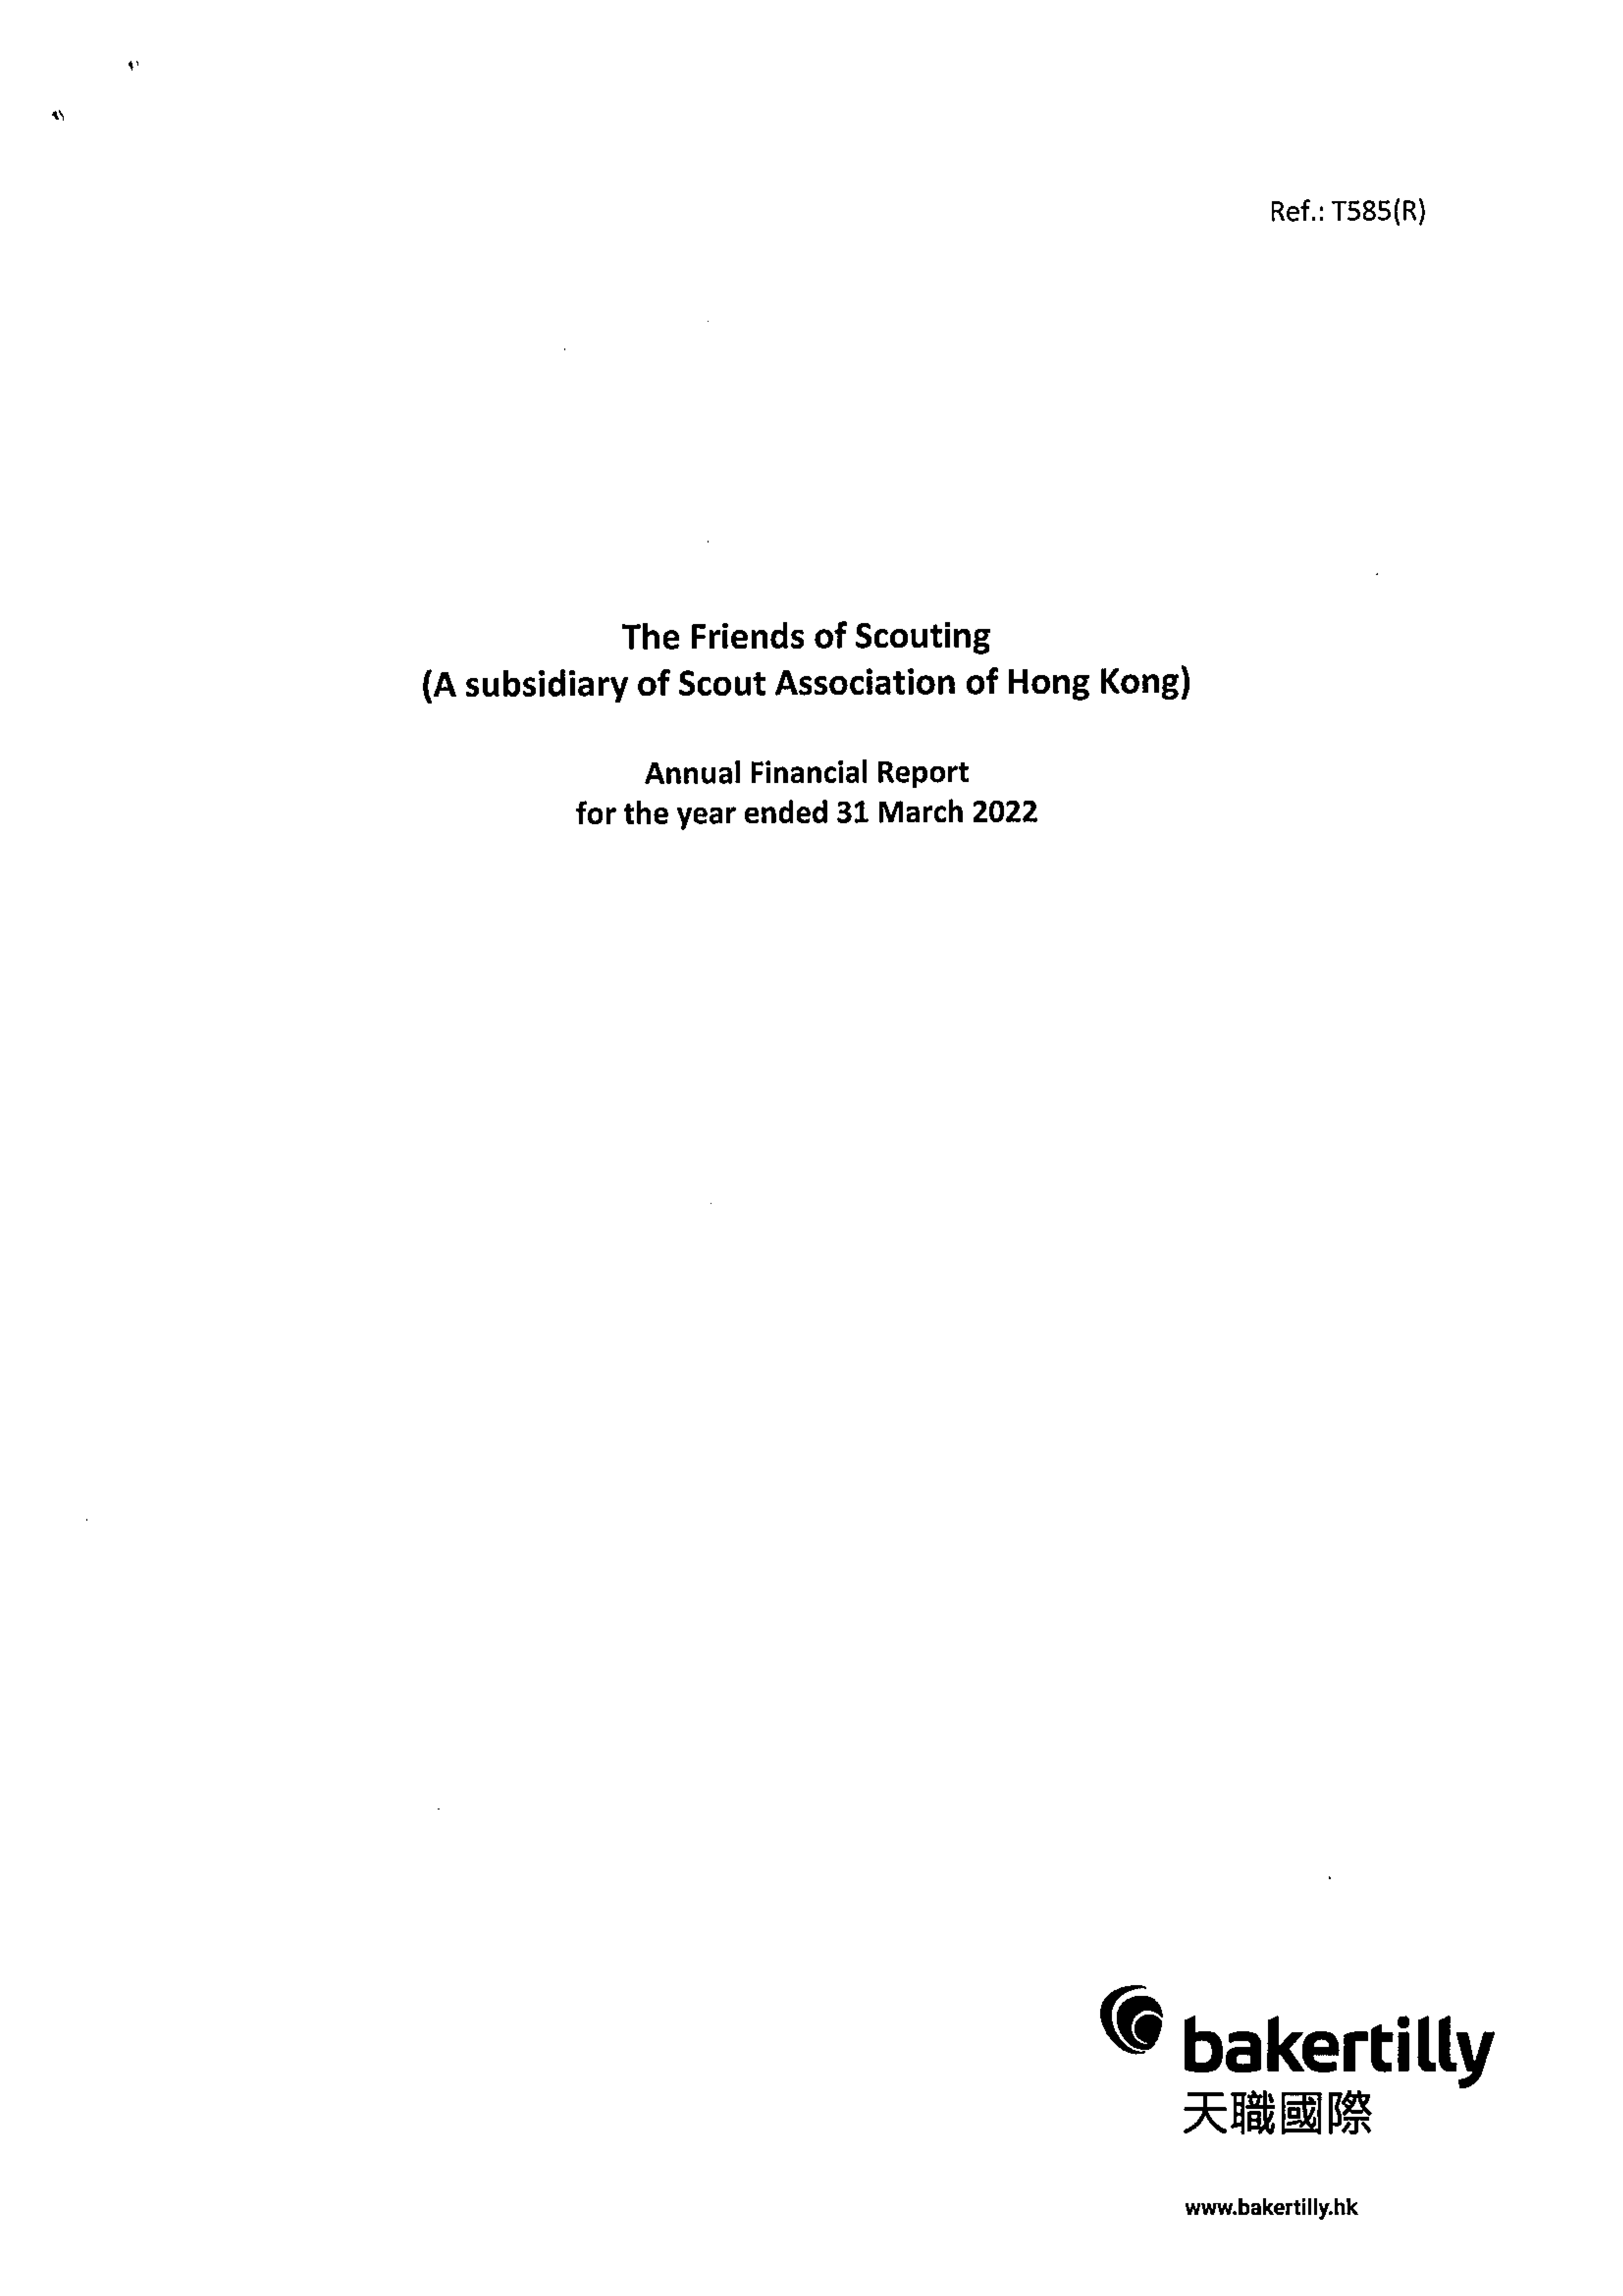 Annual Financial Report for the year ended 31 March 2022 (English Version Only)